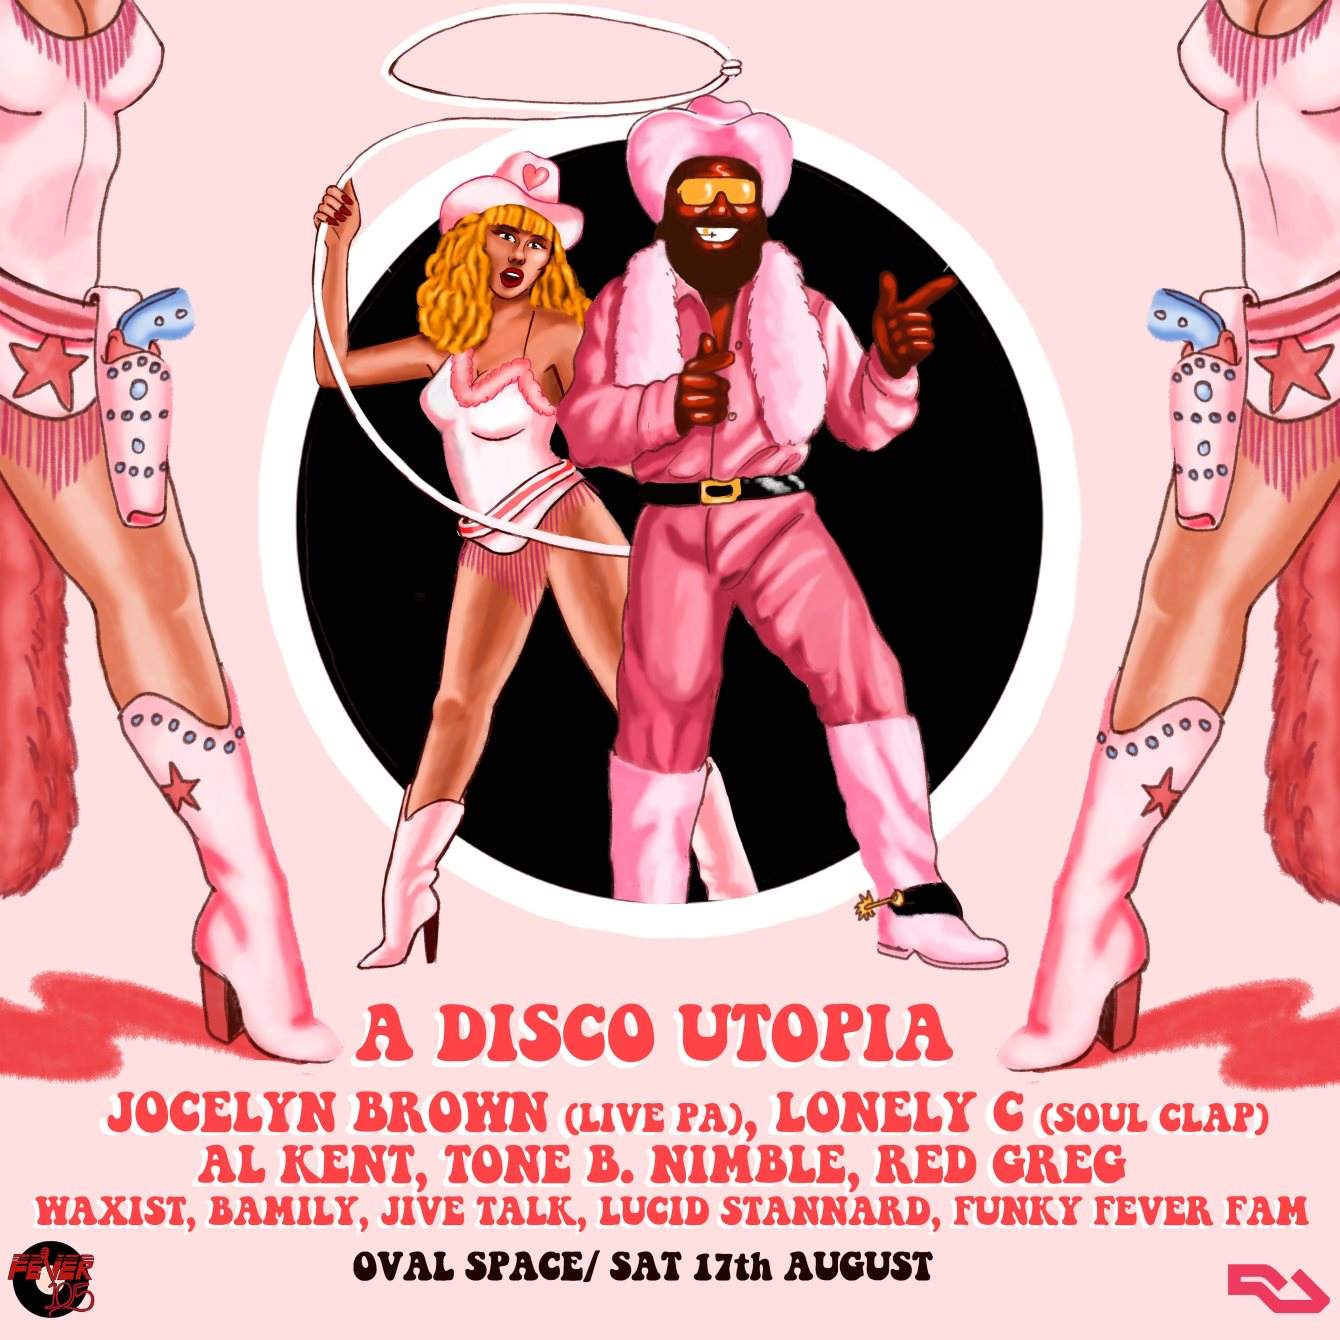 Fever 105's 'A Disco Utopia' with Jocelyn Brown, Lonely C/Soul Clap, Red Greg, Al Kent & More - フライヤー表